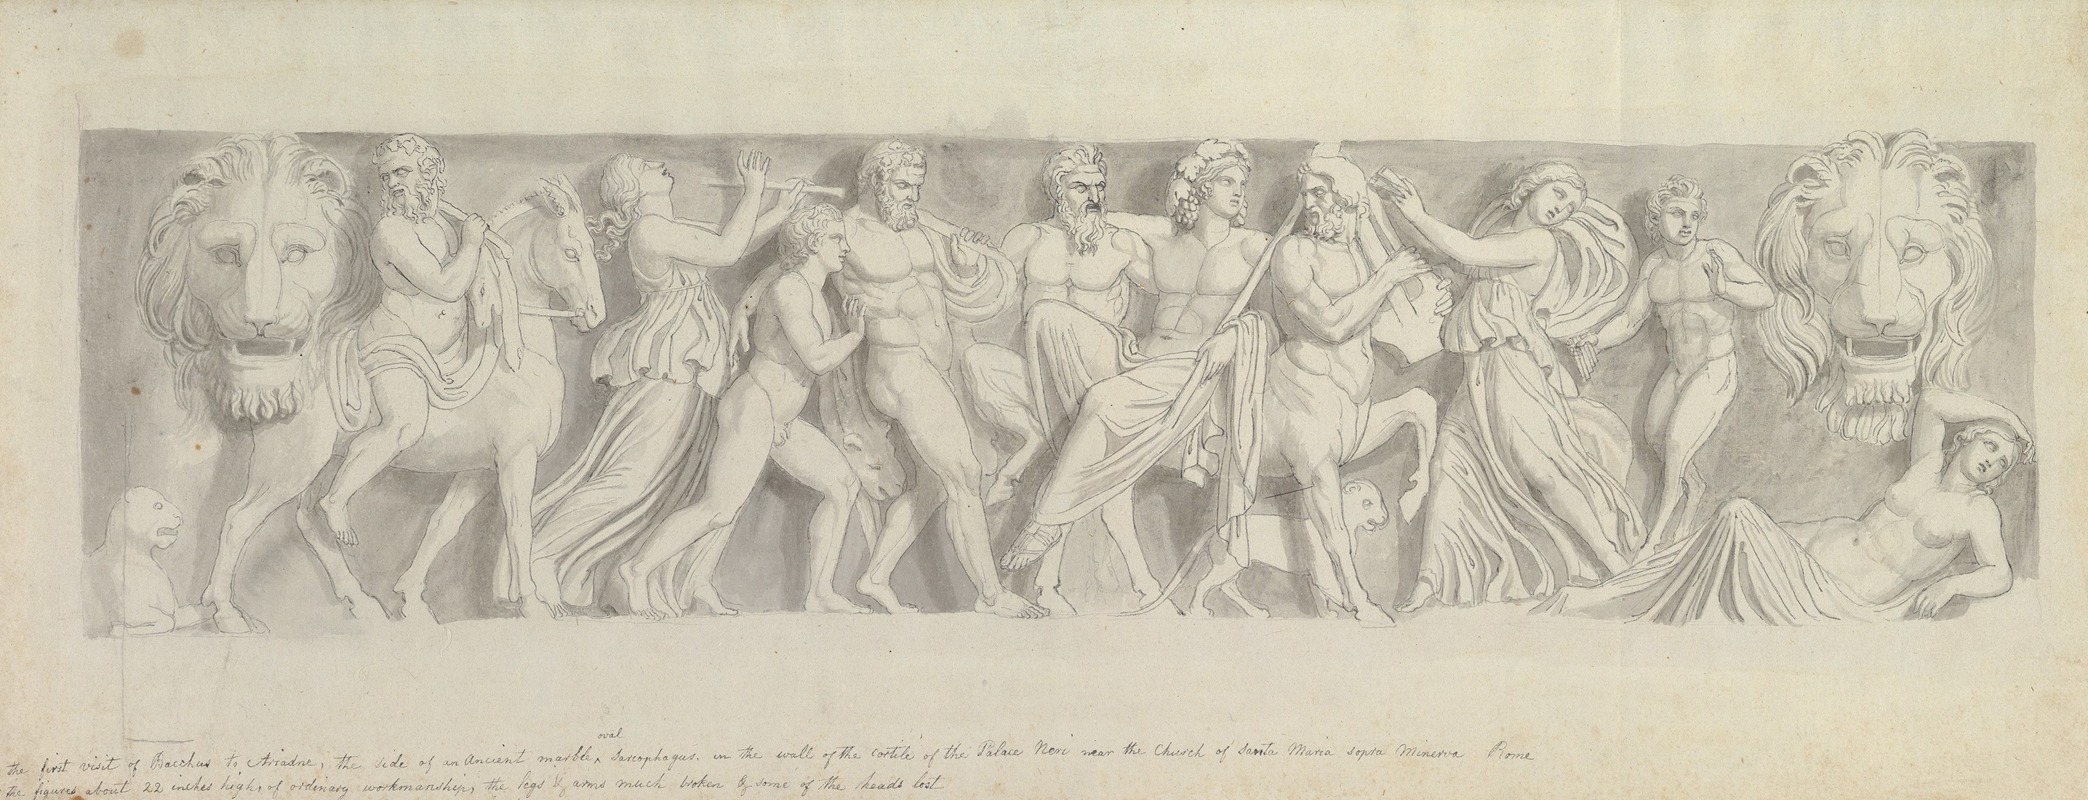 John Flaxman - Design for a Frieze, after a Roman Sarcophagus; The First Visit of Bacchus to Ariadne